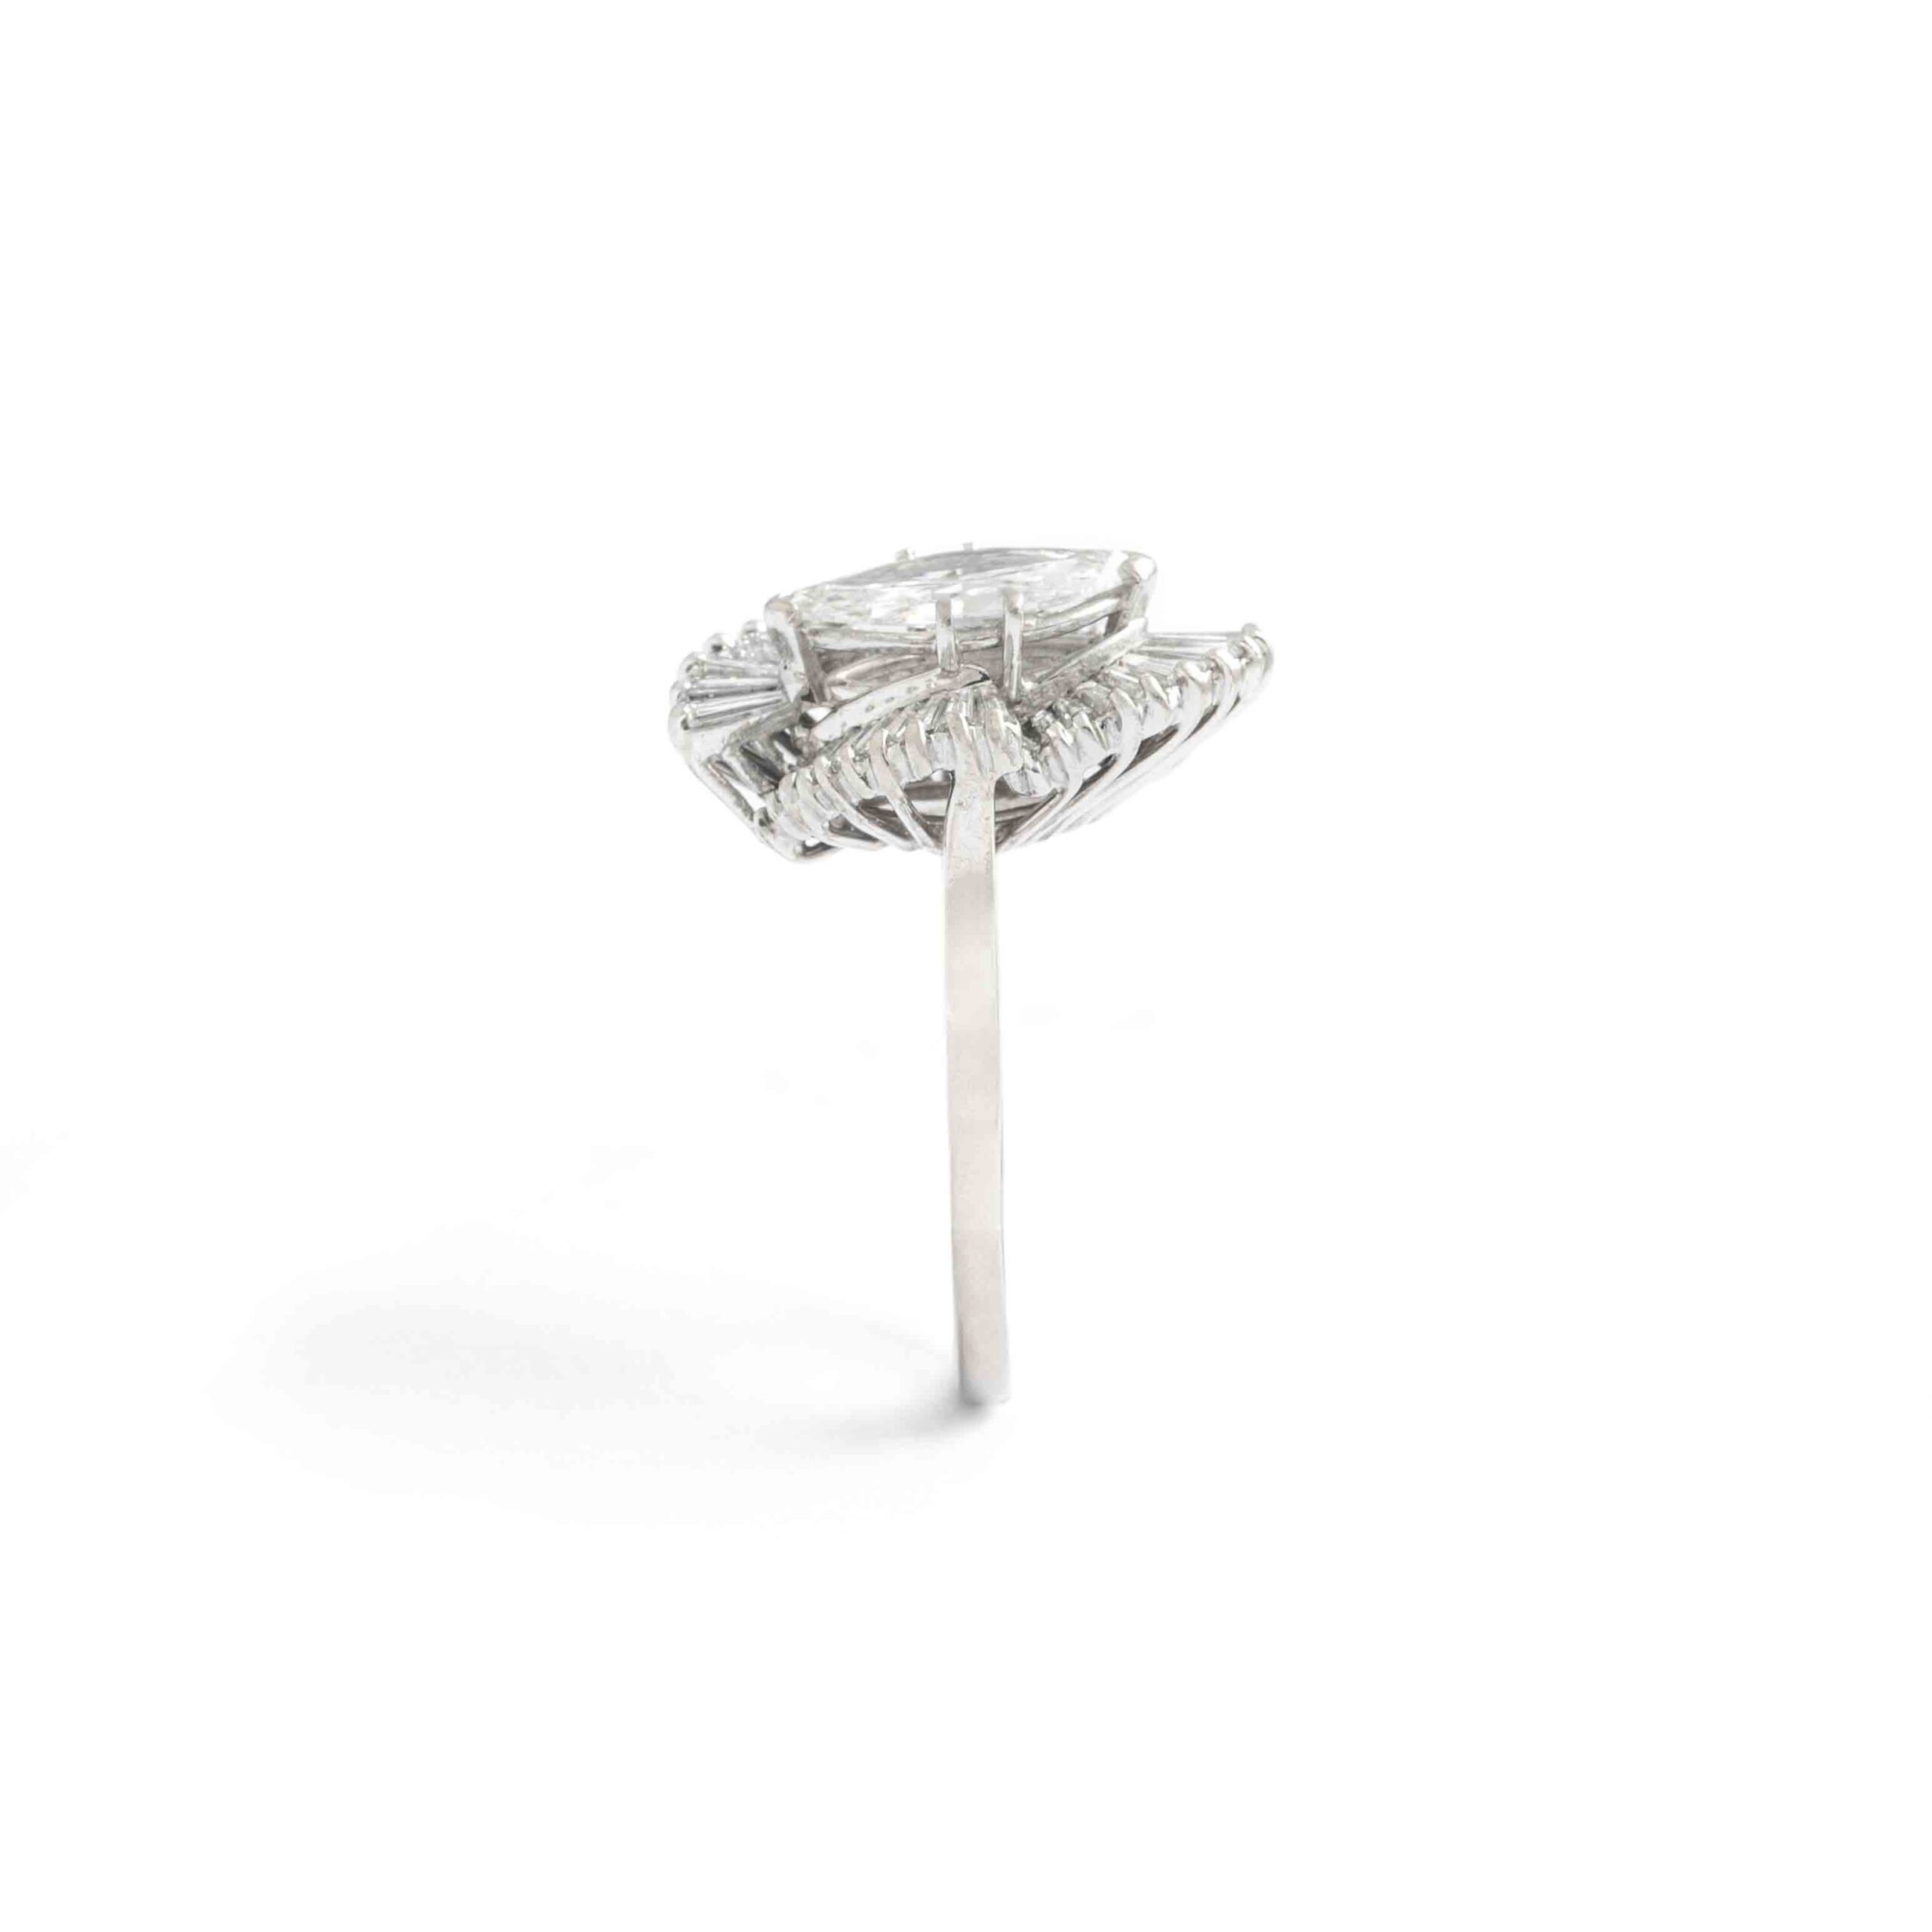 1.38 Carat Marquise Diamond White Gold 14K Ring. The central marquise Diamond weights 1.38 carat, F color and Si2 clarity, No fluorescence surrounded by baguette cut diamond. Circa 1950.